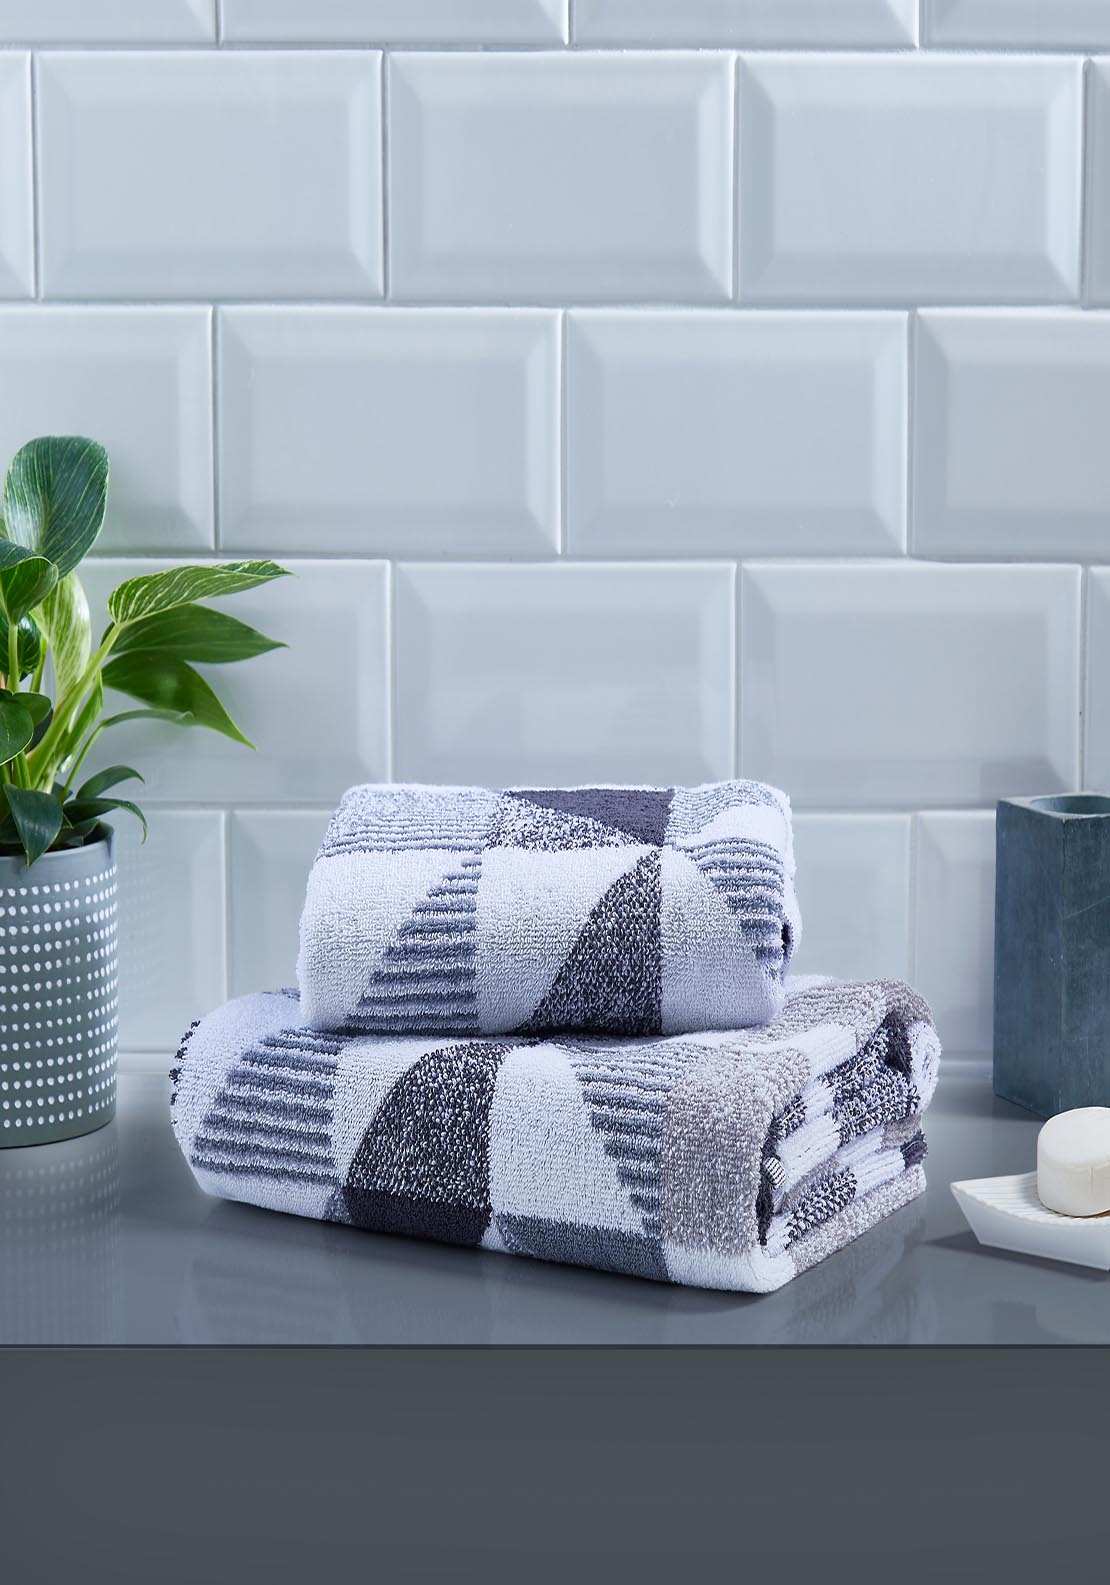 The Home Collection Hendra Hand Towel - Monochrome 1 Shaws Department Stores